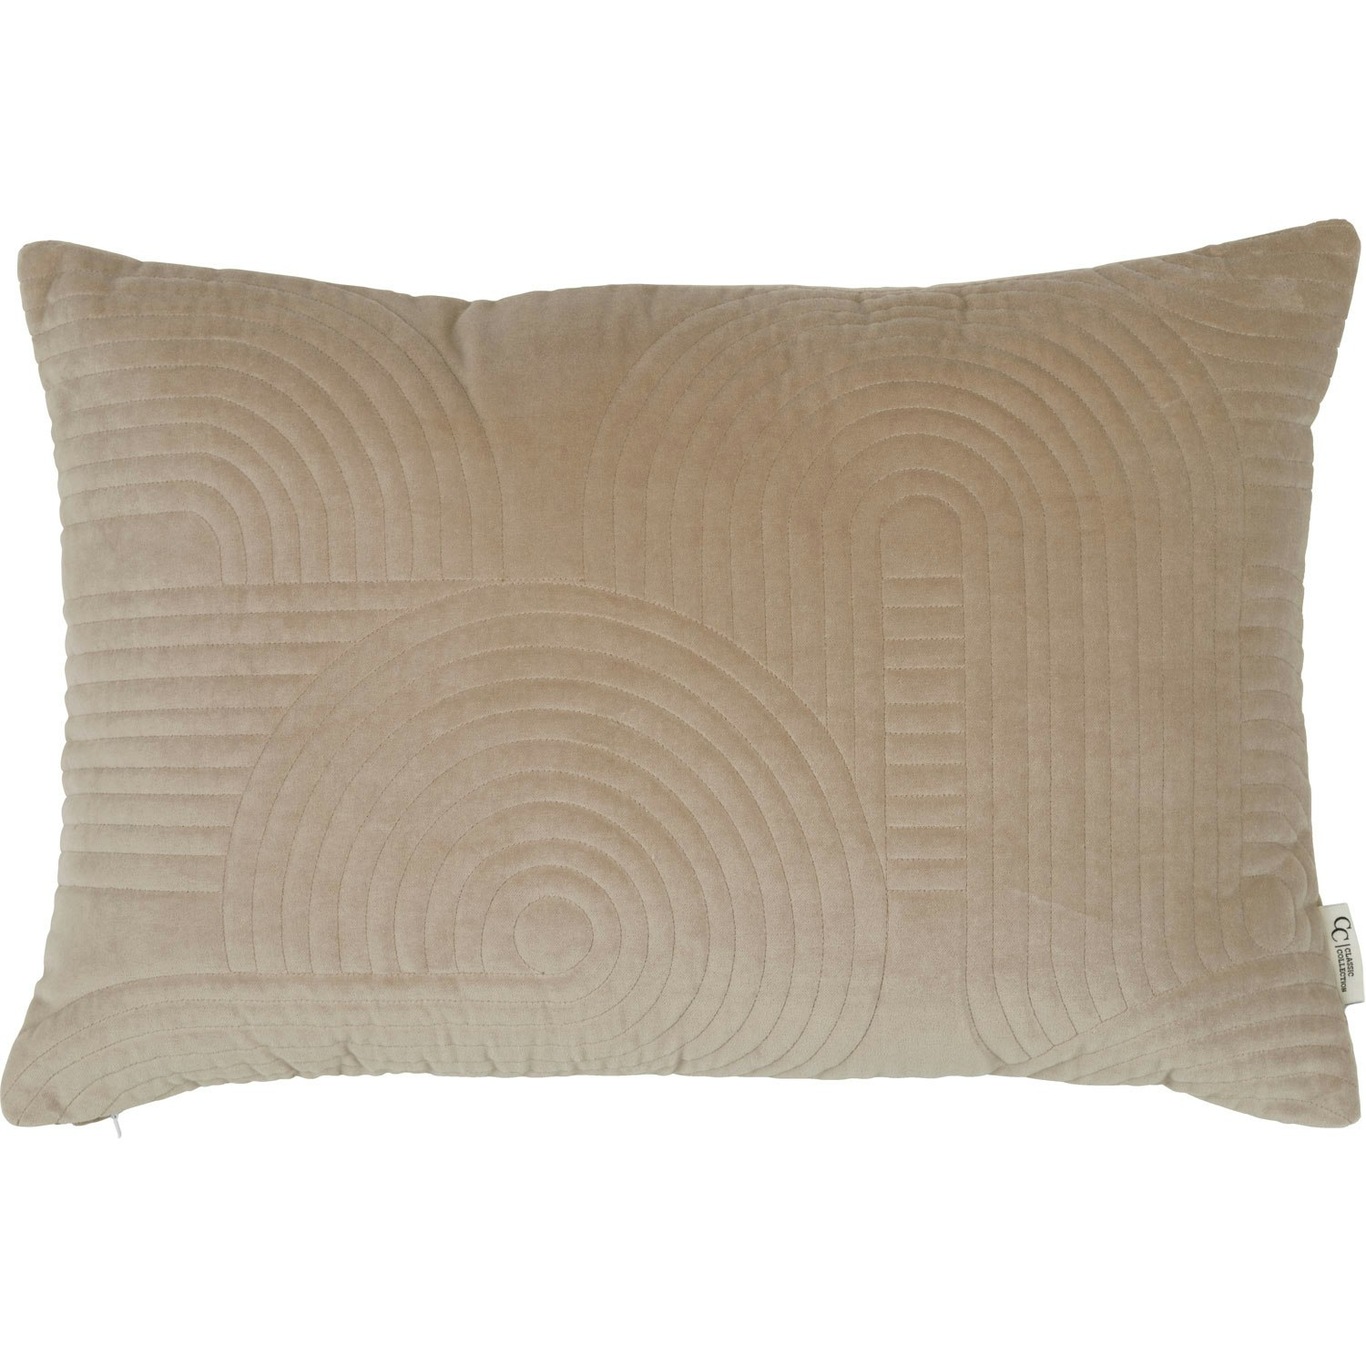 Arch Cushion Cover 40x60 cm, Taupe